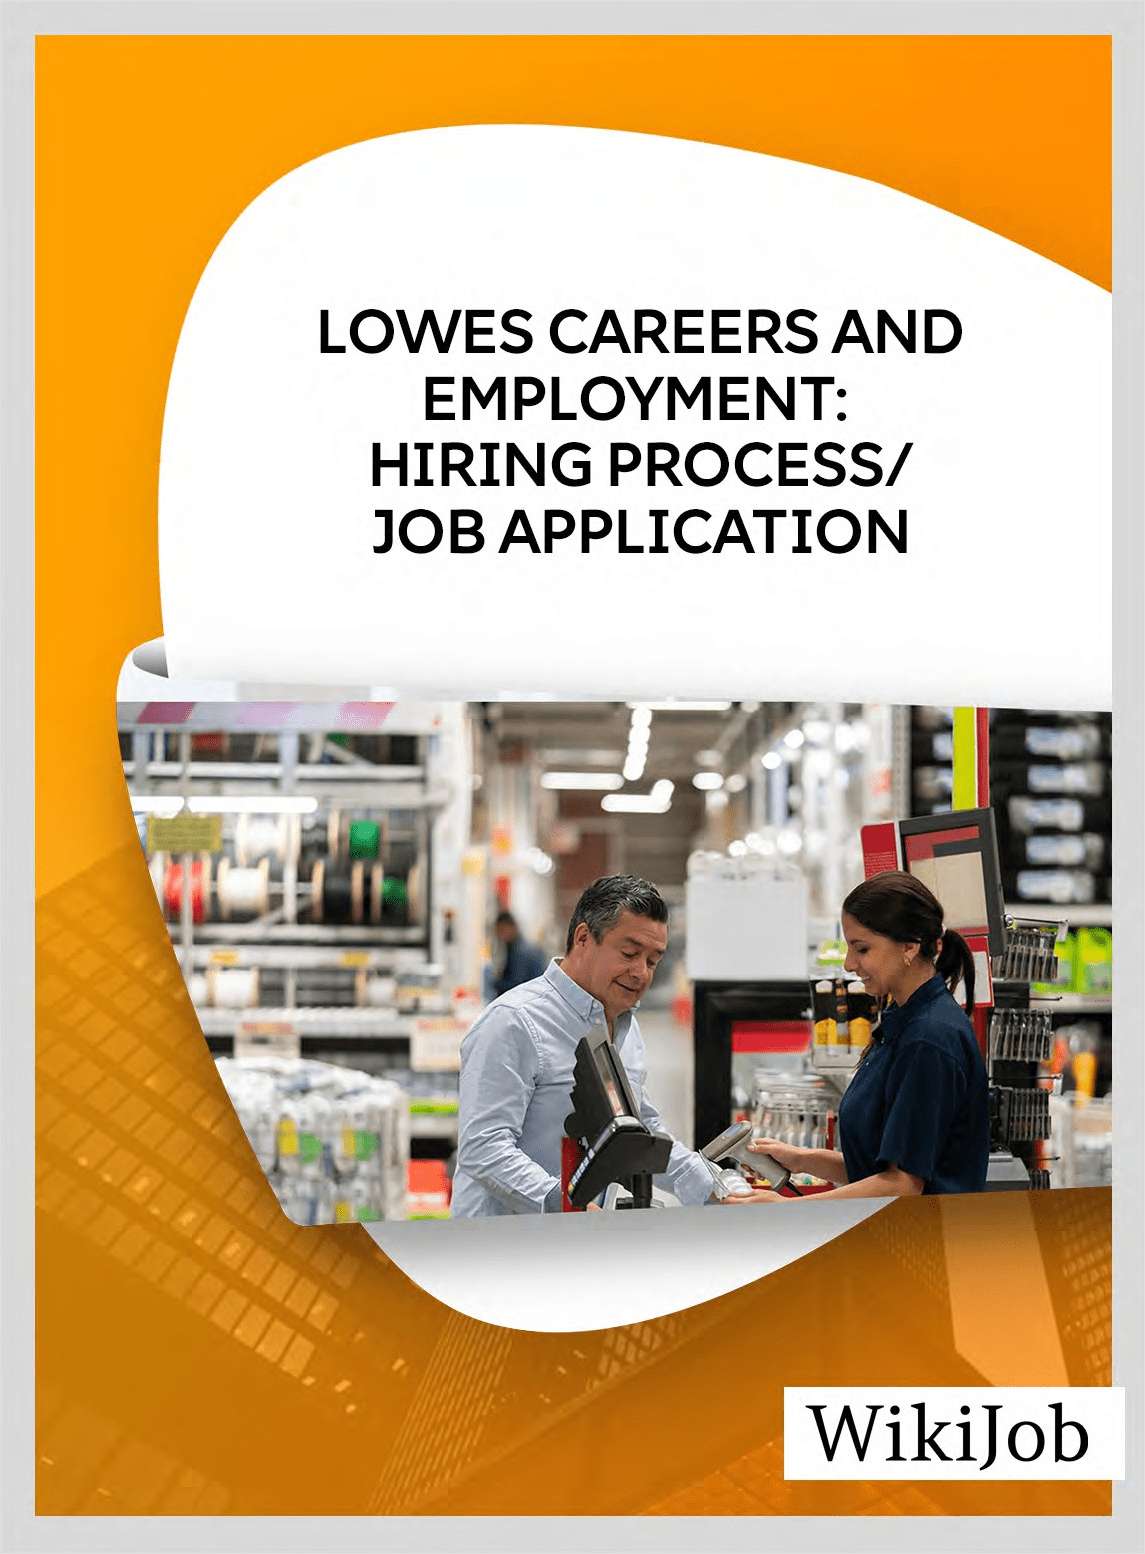 Lowes Careers and Employment: Hiring Process/Job Application